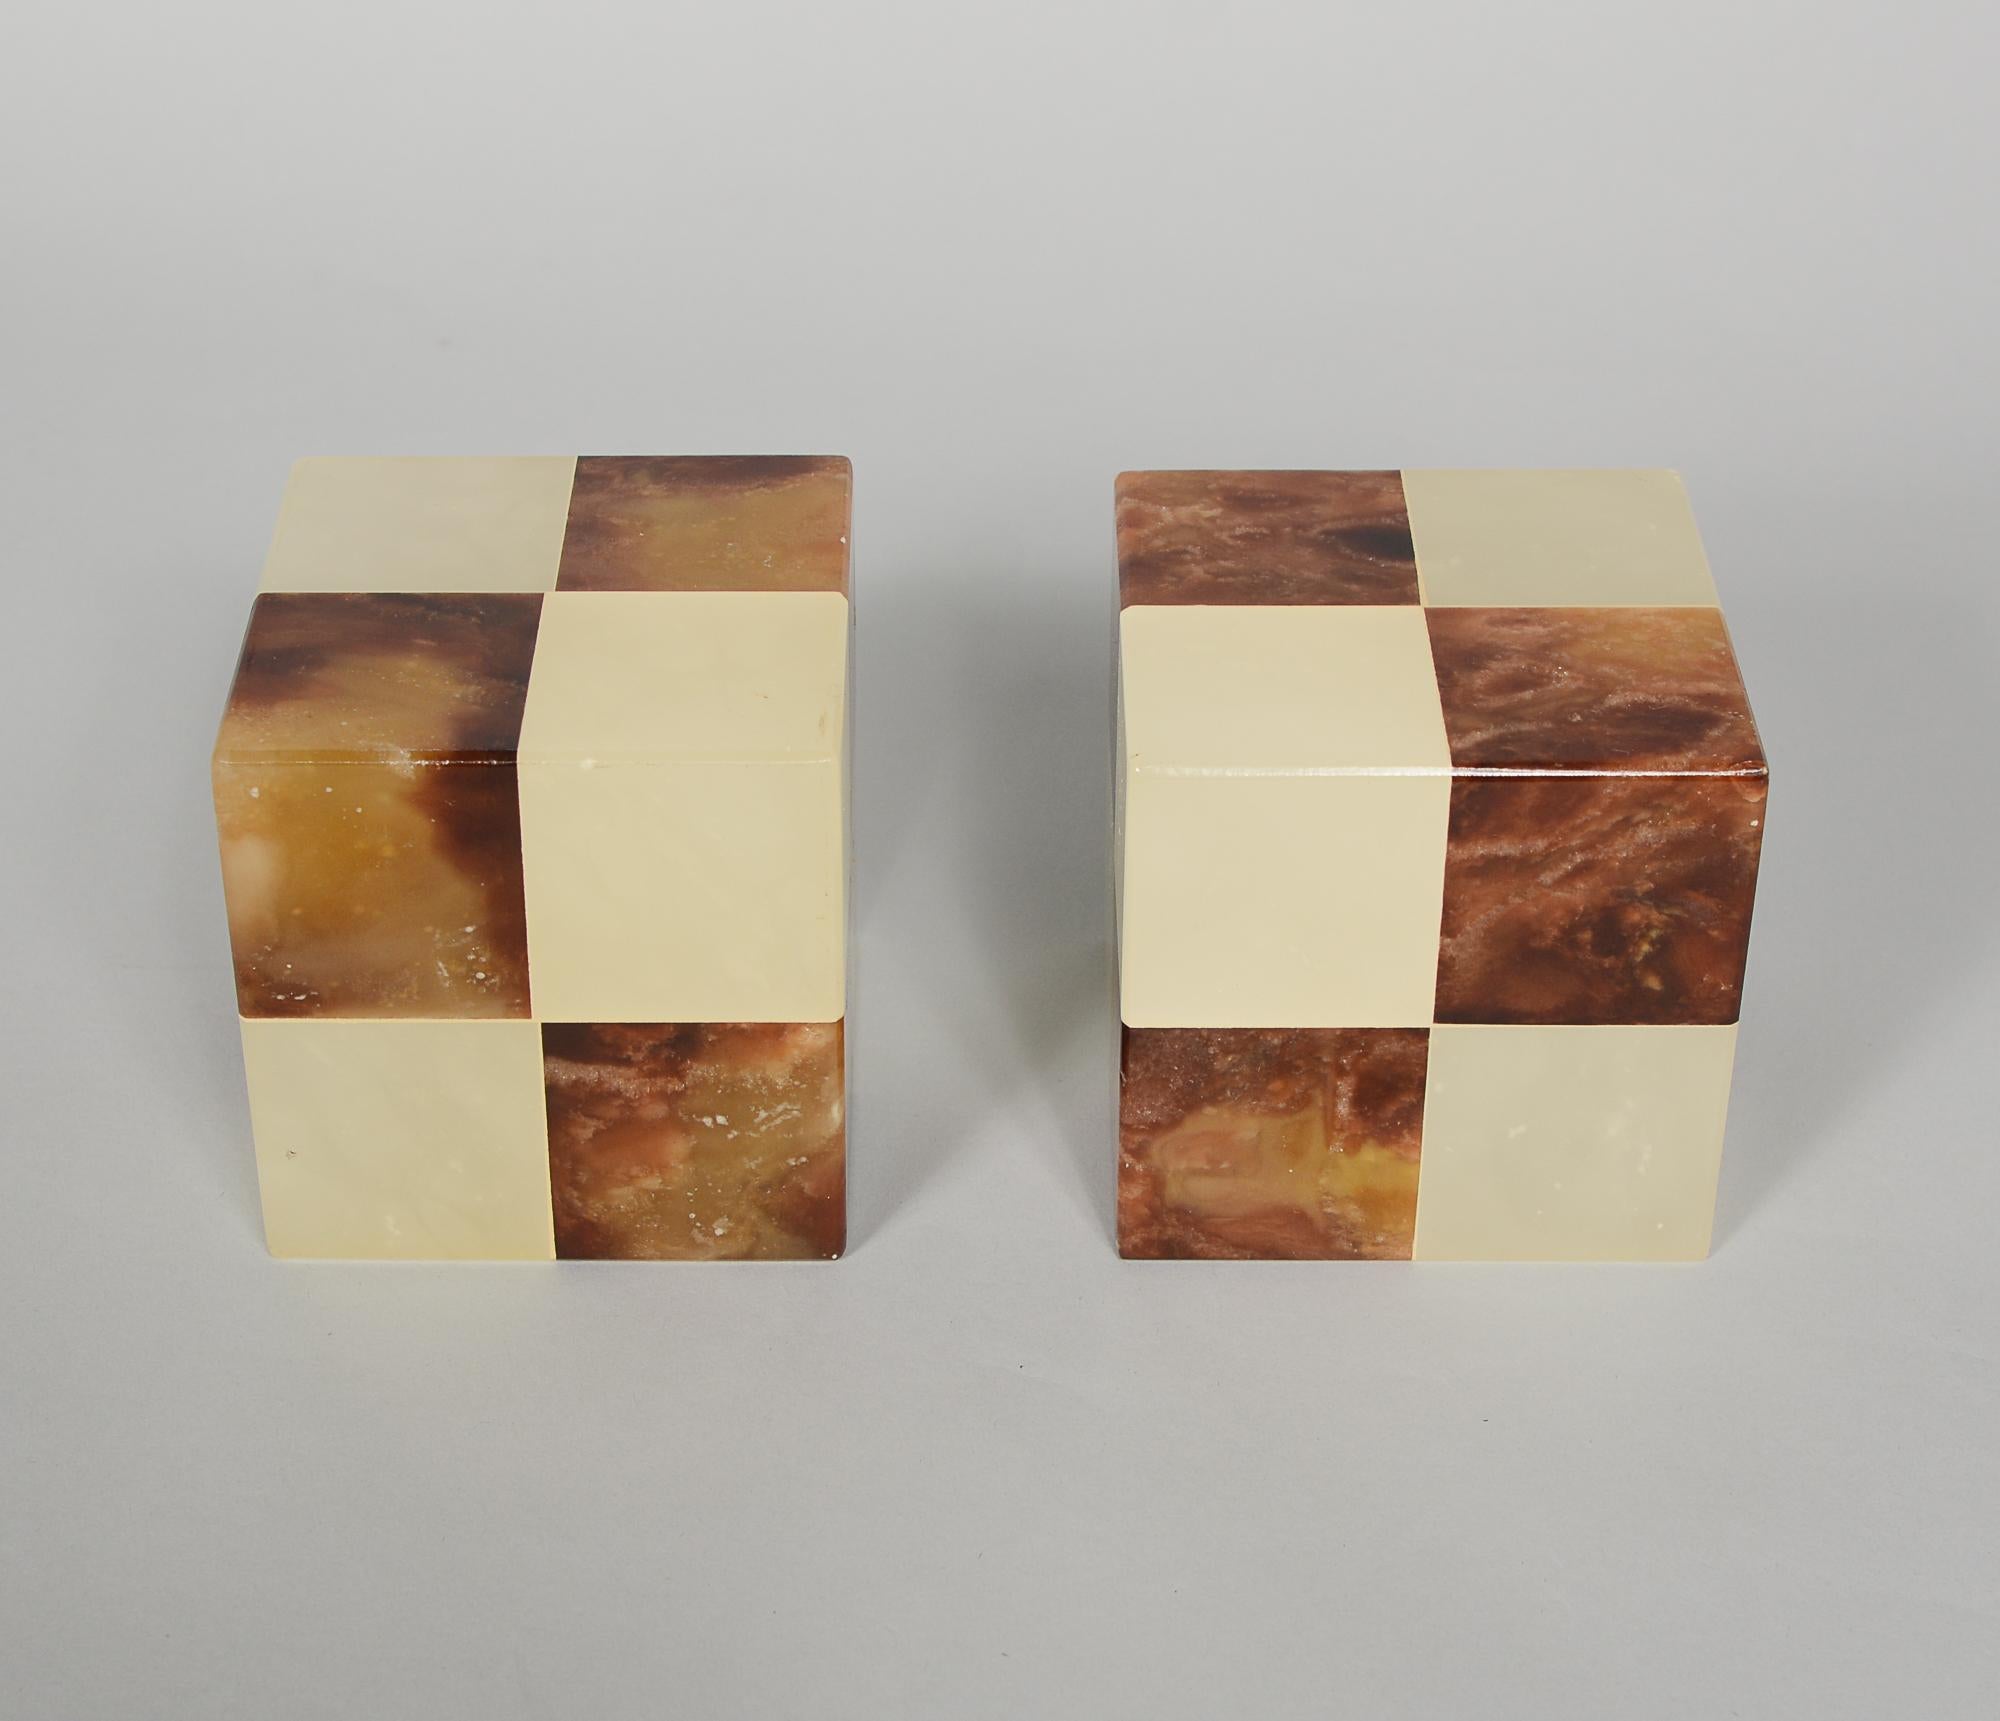 Pair of Italian checkerboard alabaster bookends made expressly for Gump's of San Francisco. These retain original labels. There are a couple of small dings to the edges. One corner appears to be cracked.